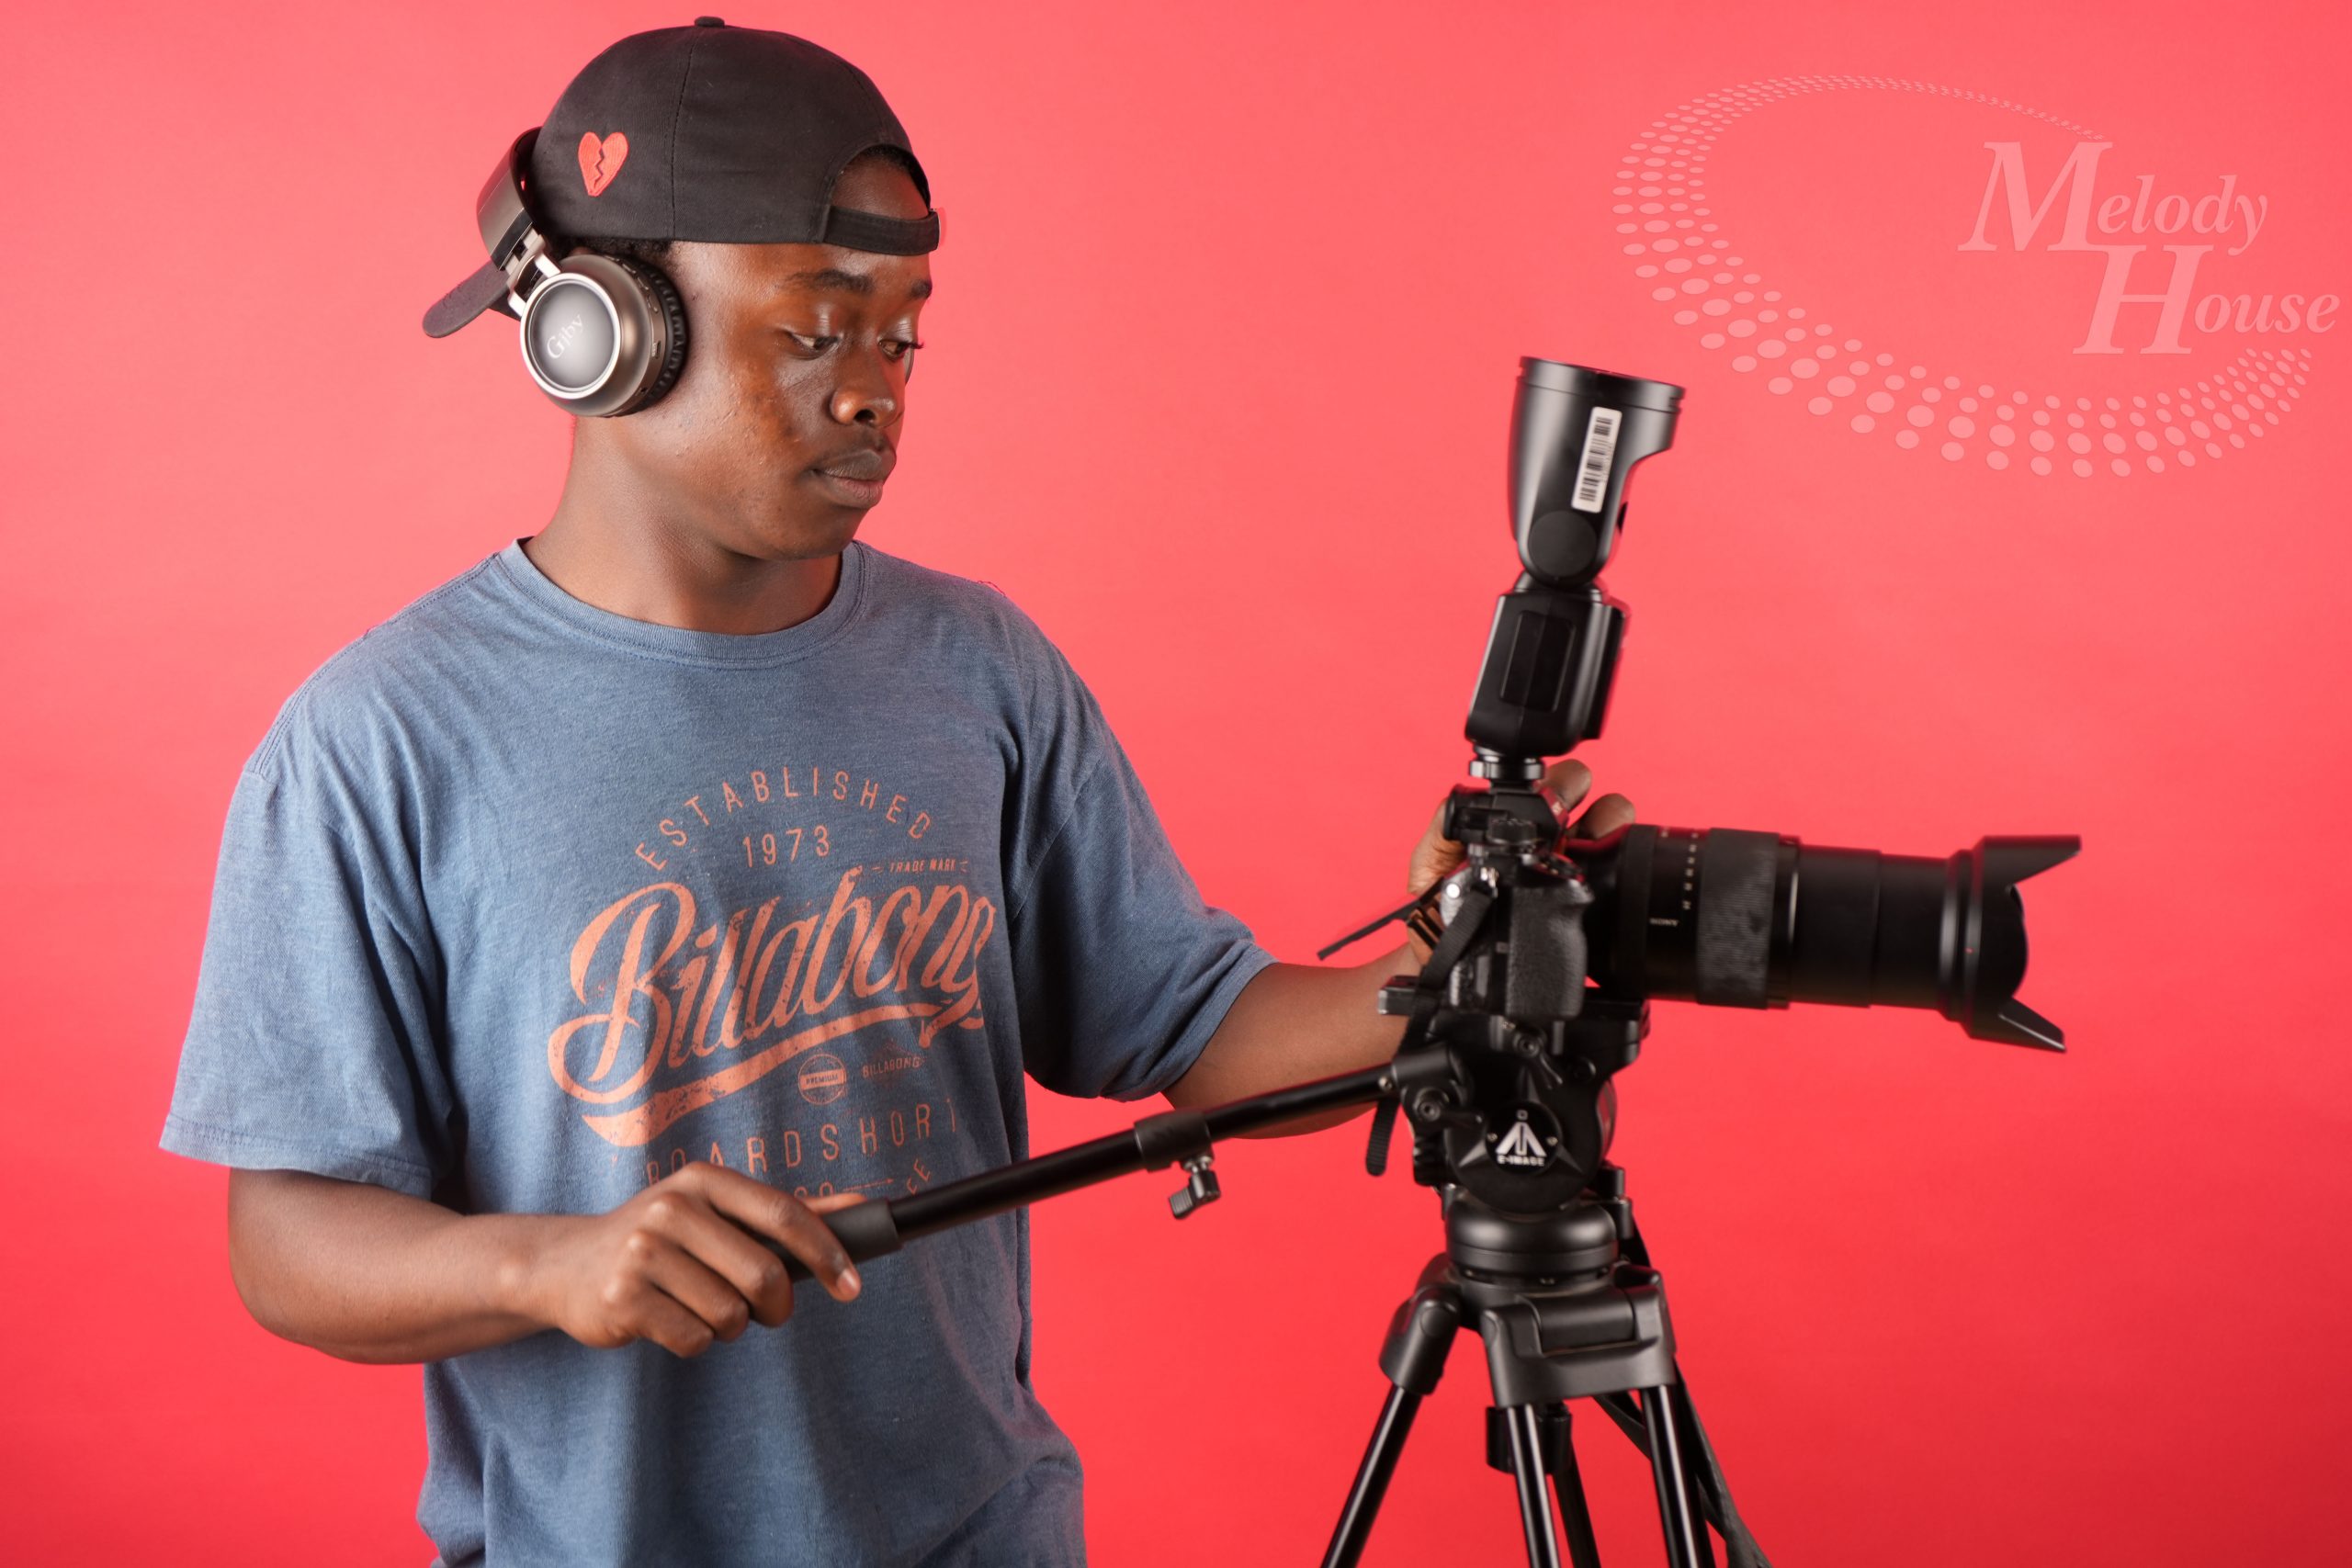 photography courses in kenya, film production courses, videography courses in kenya